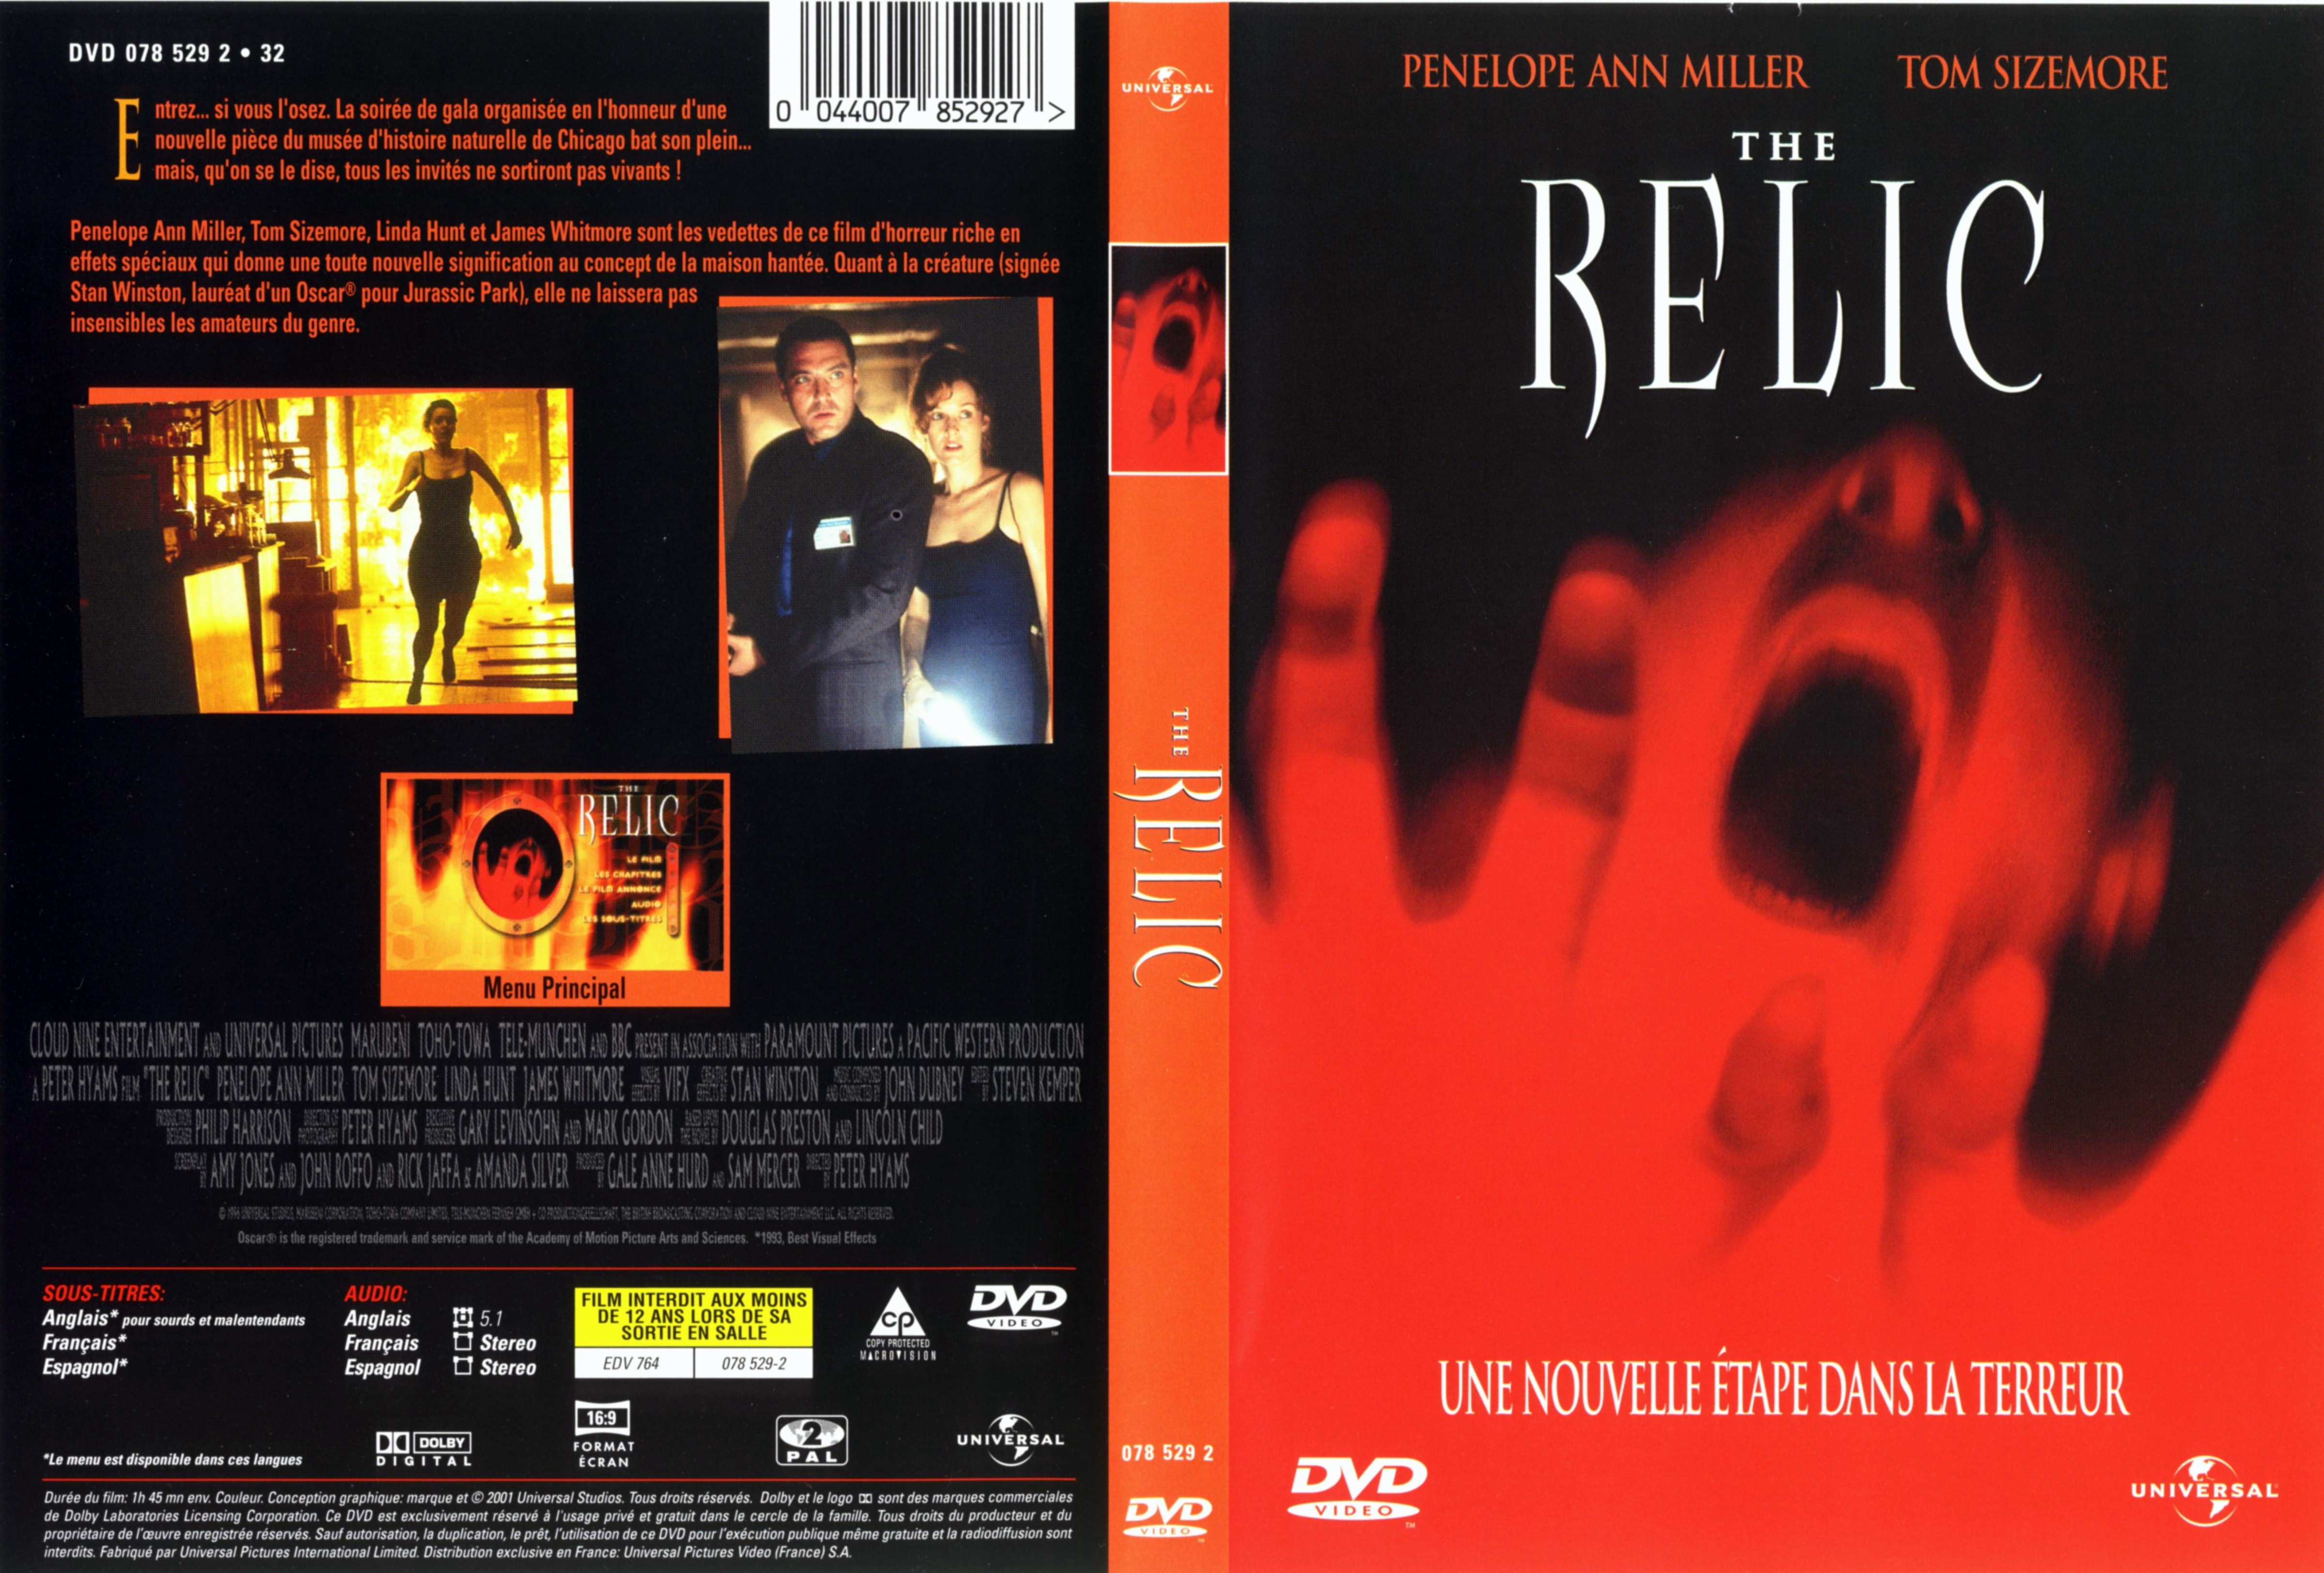 Jaquette DVD The relic